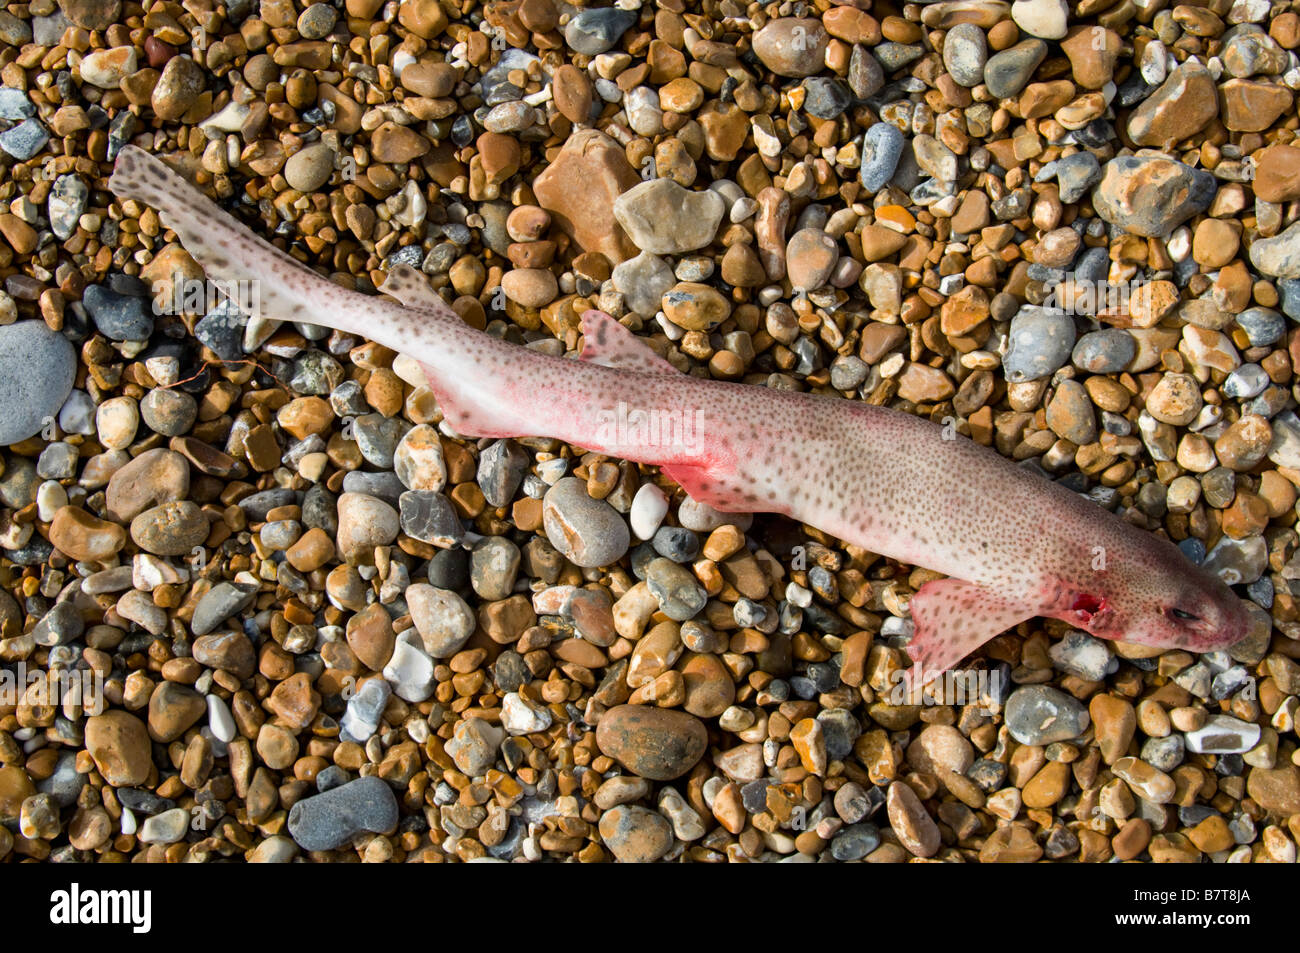 Dead Lesser Spotted Dogfish (Scyliorhinus canicula) on Hastings Beach UK Stock Photo